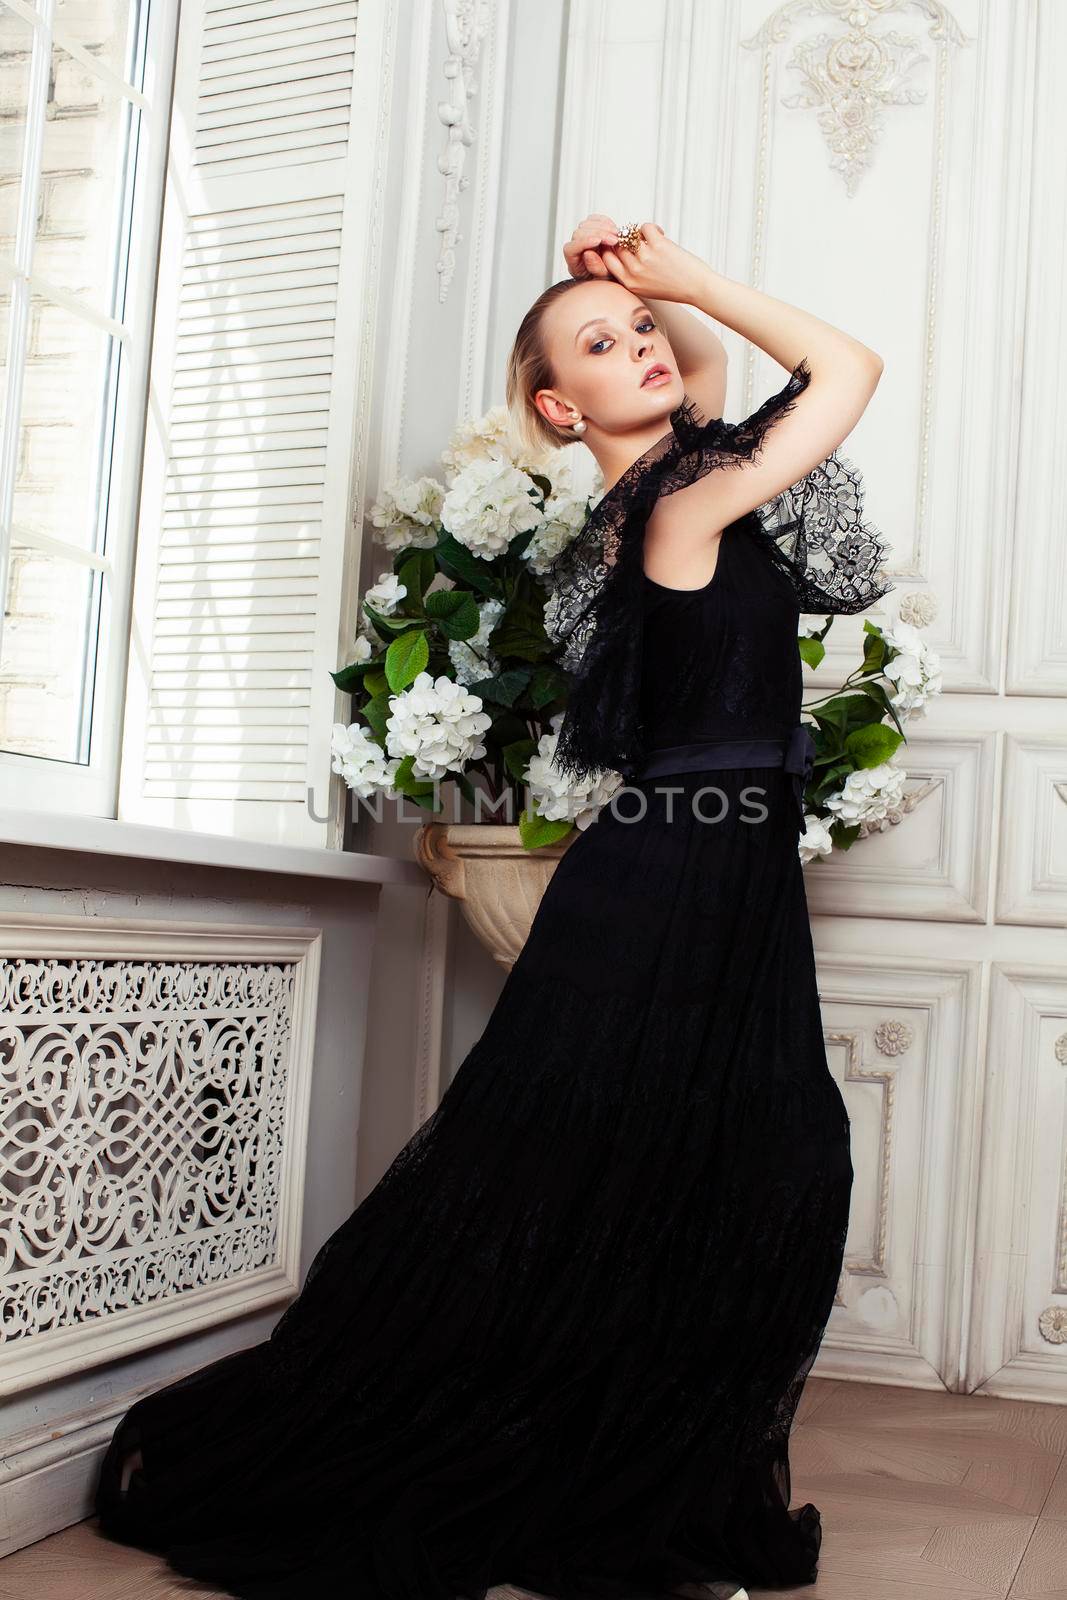 young pretty lady in black lace fashion style dress posing in rich interior of royal hotel room, luxury lifestyle people concept closeup